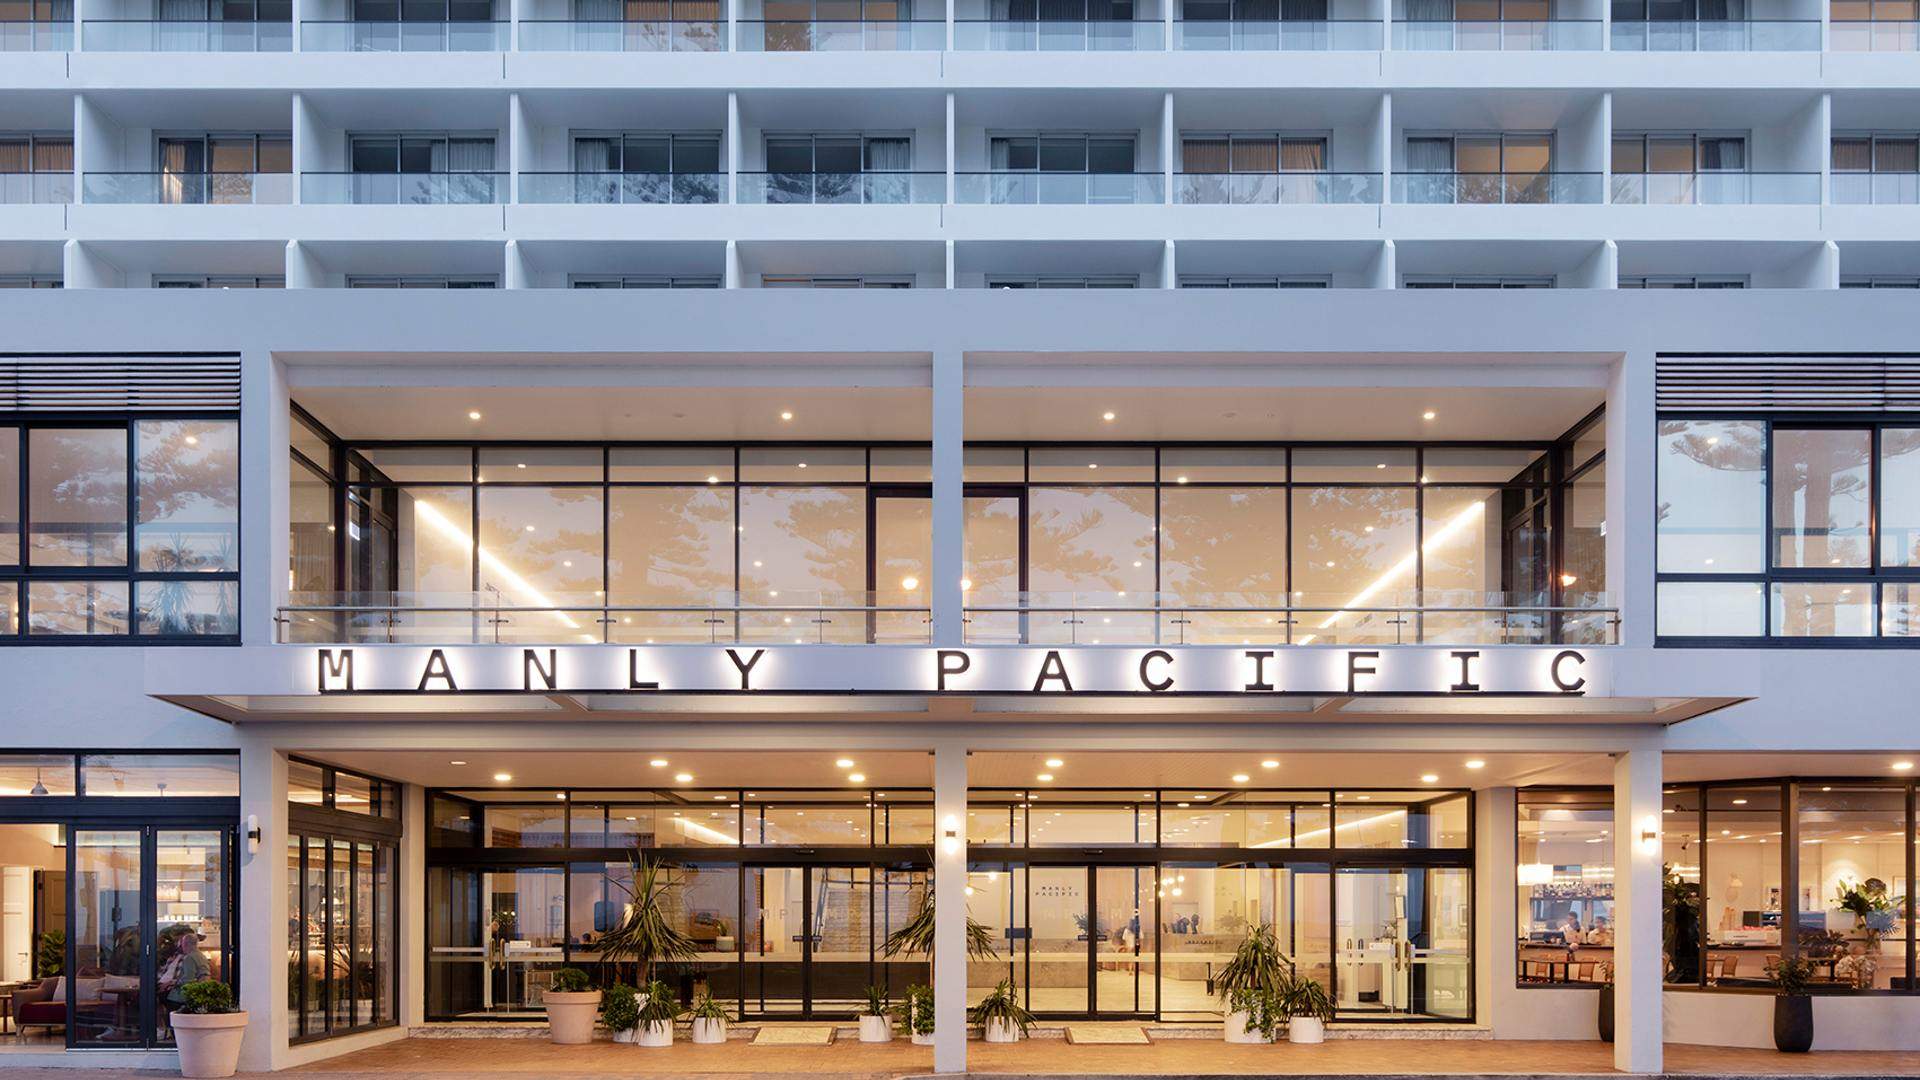 Beachfront Hotel Manly Pacific Has Unveiled Its Luxe $30-Million Revamp with a Rooftop Pool and Lobby Bar